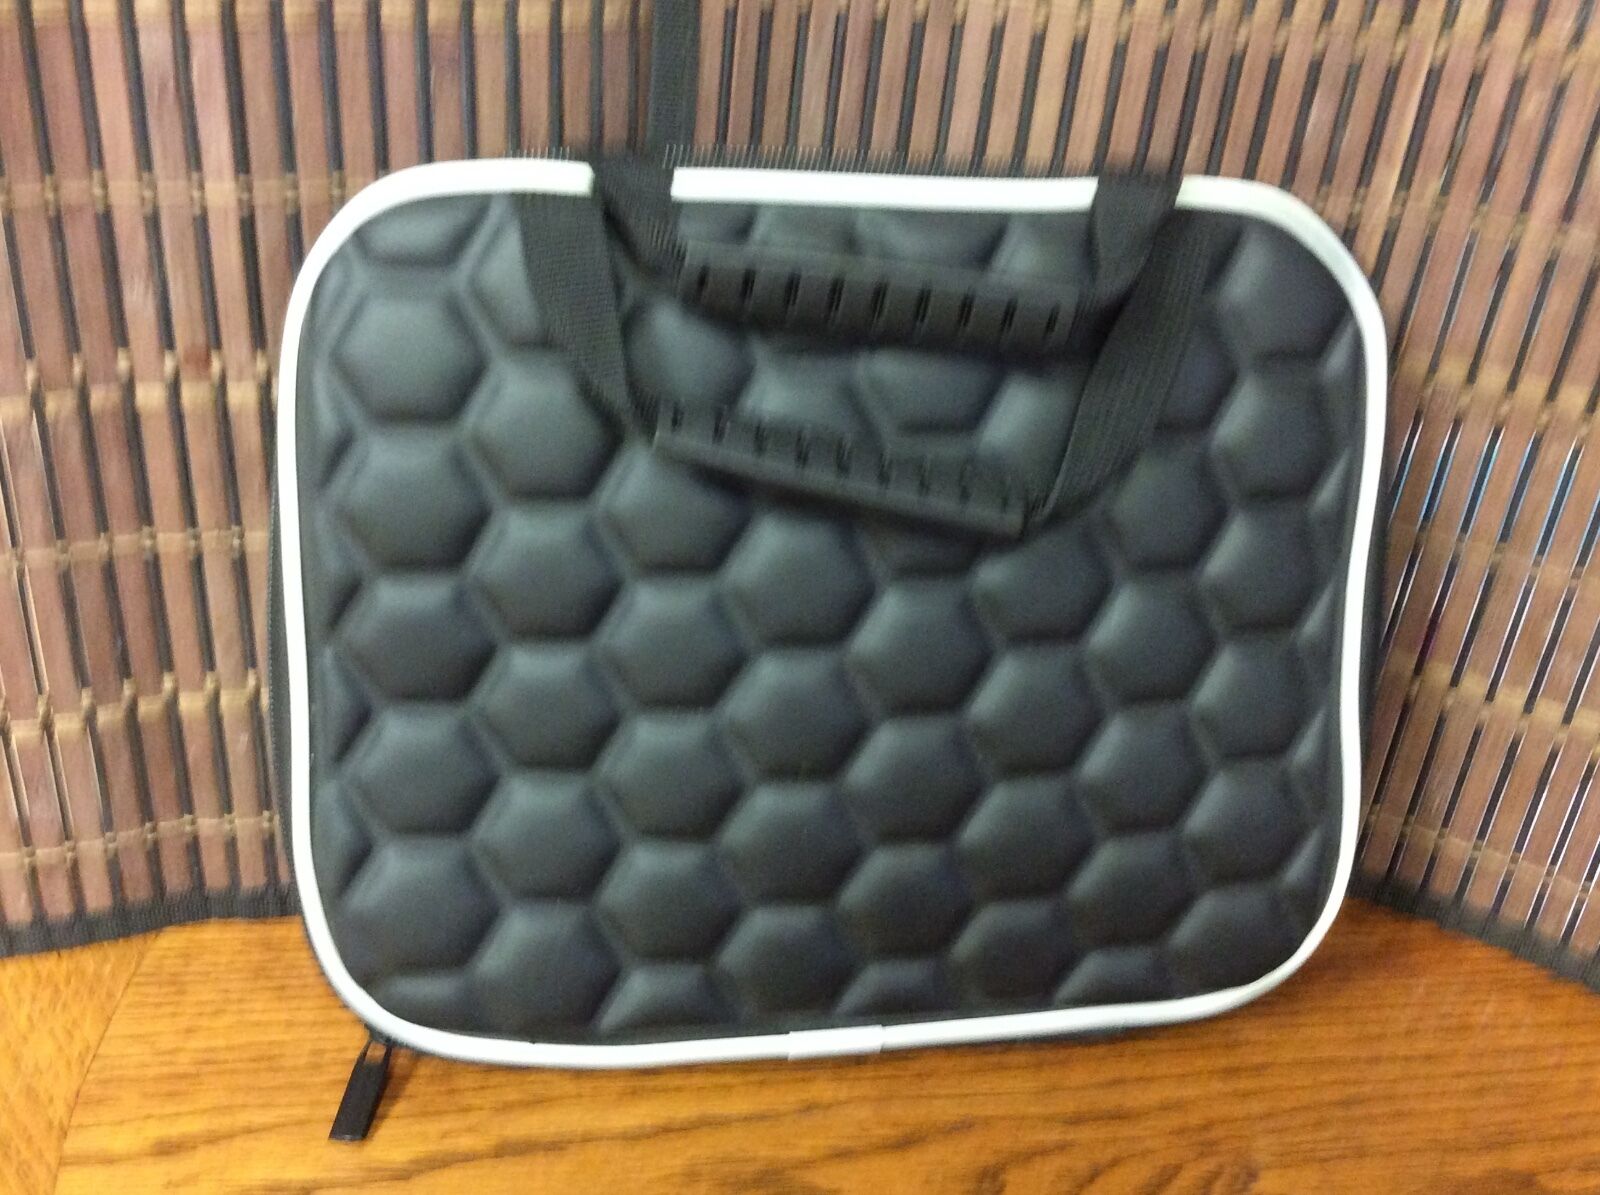 Carrying Case Suitable for Up to a Full Size Ipad Type Device Black New H2